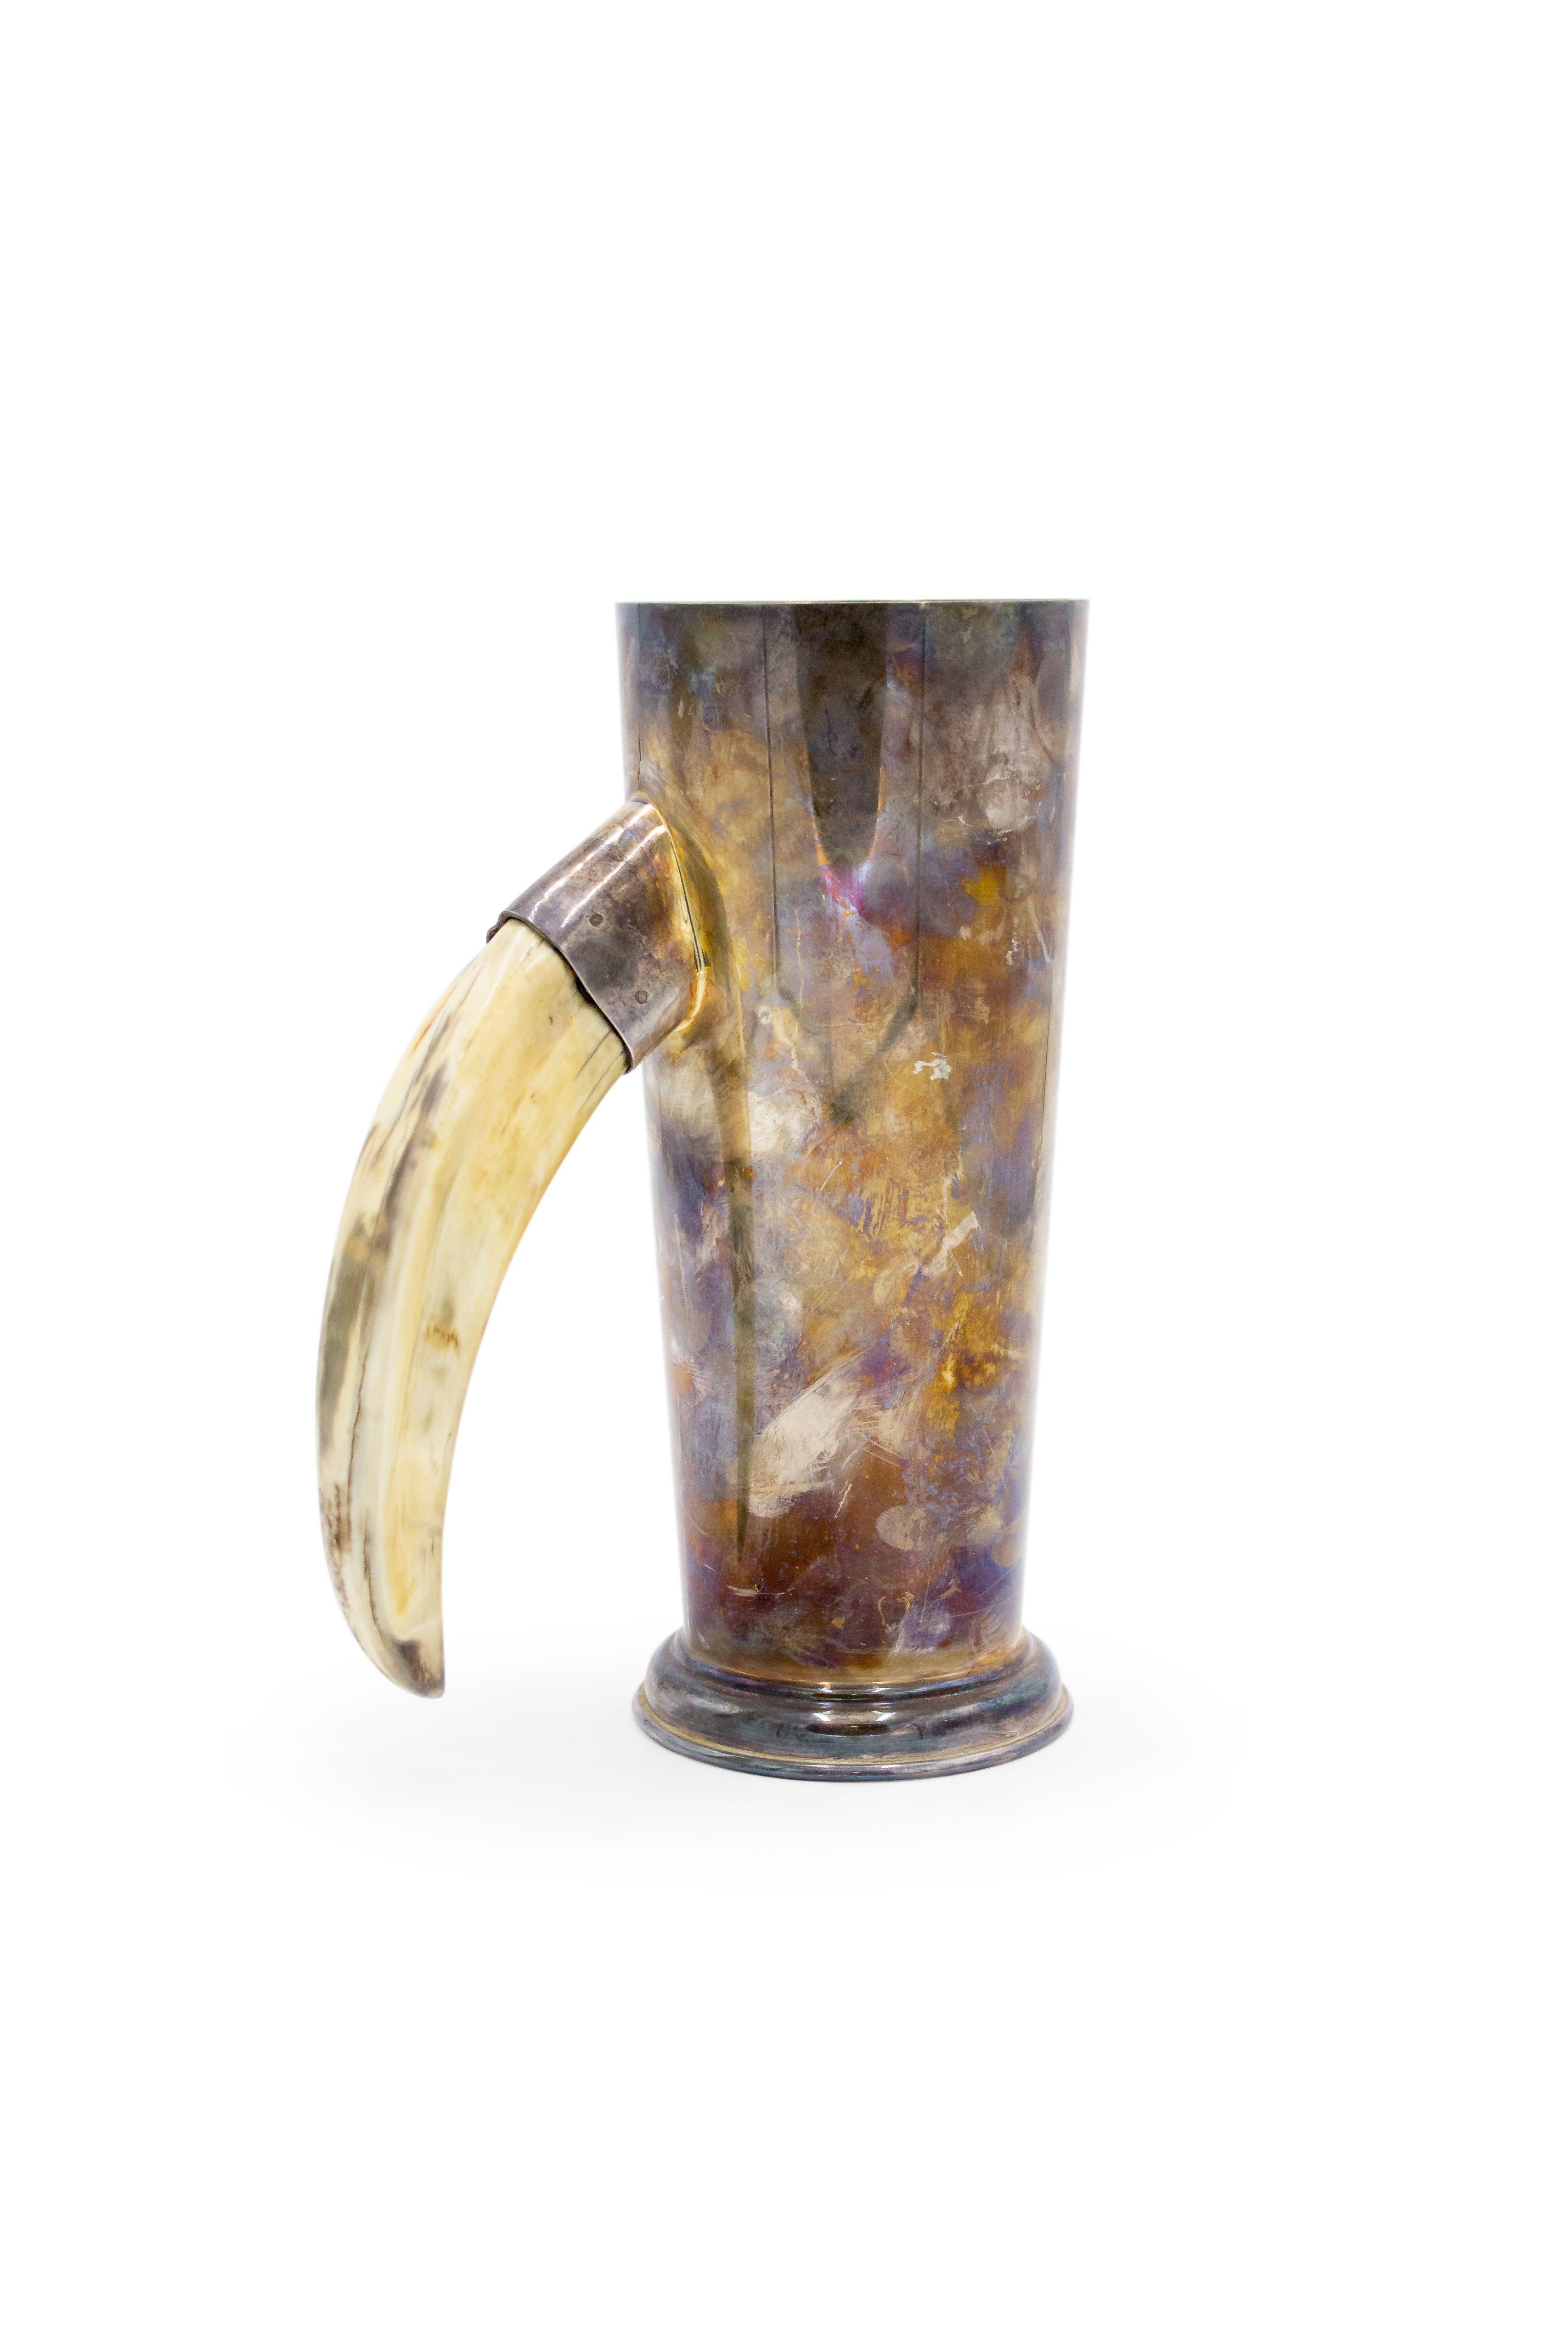 Silver Plated Tankard with Boar Tusk Handle In Good Condition For Sale In New York, NY